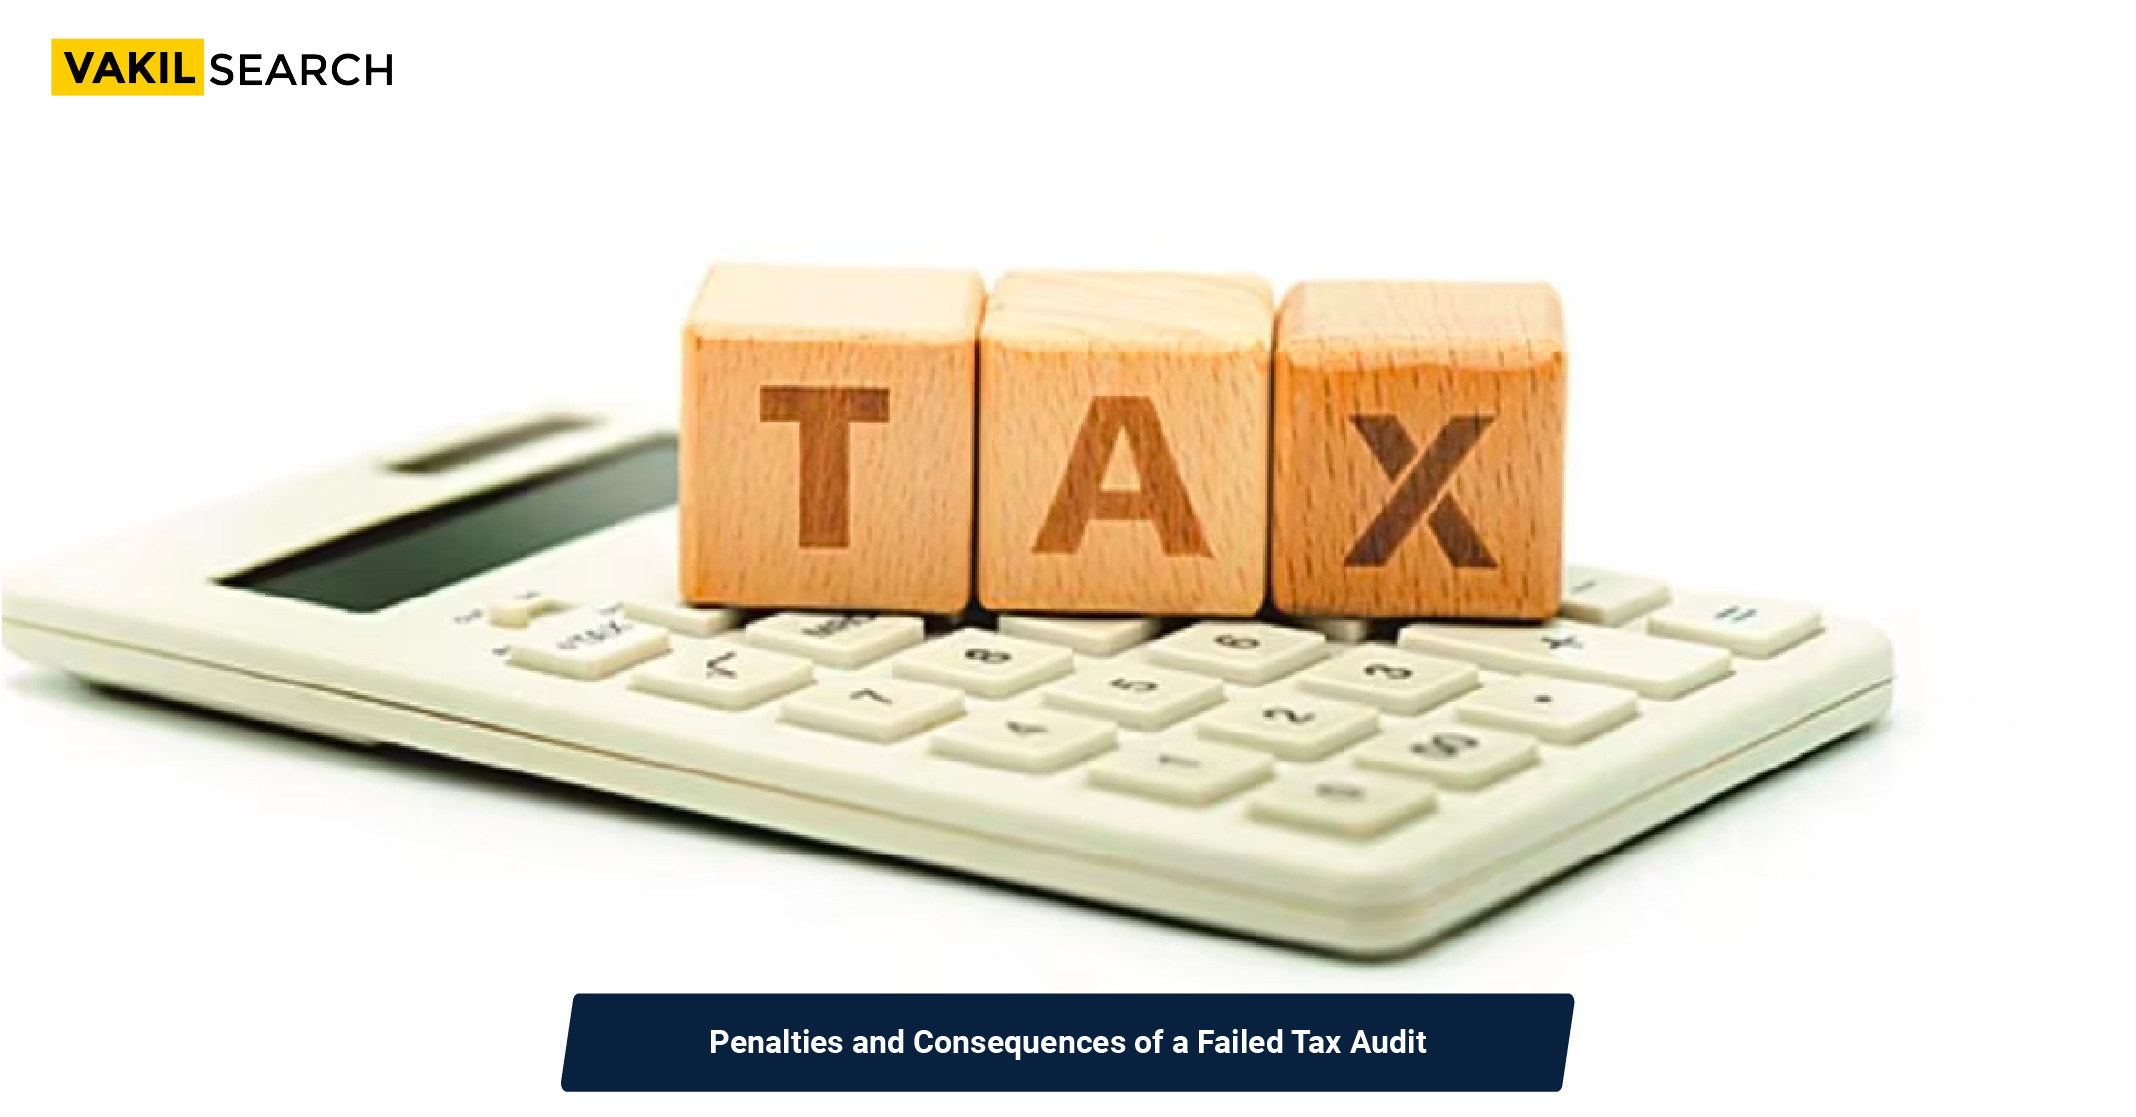 Penalties and Consequences of a Failed Tax Audit